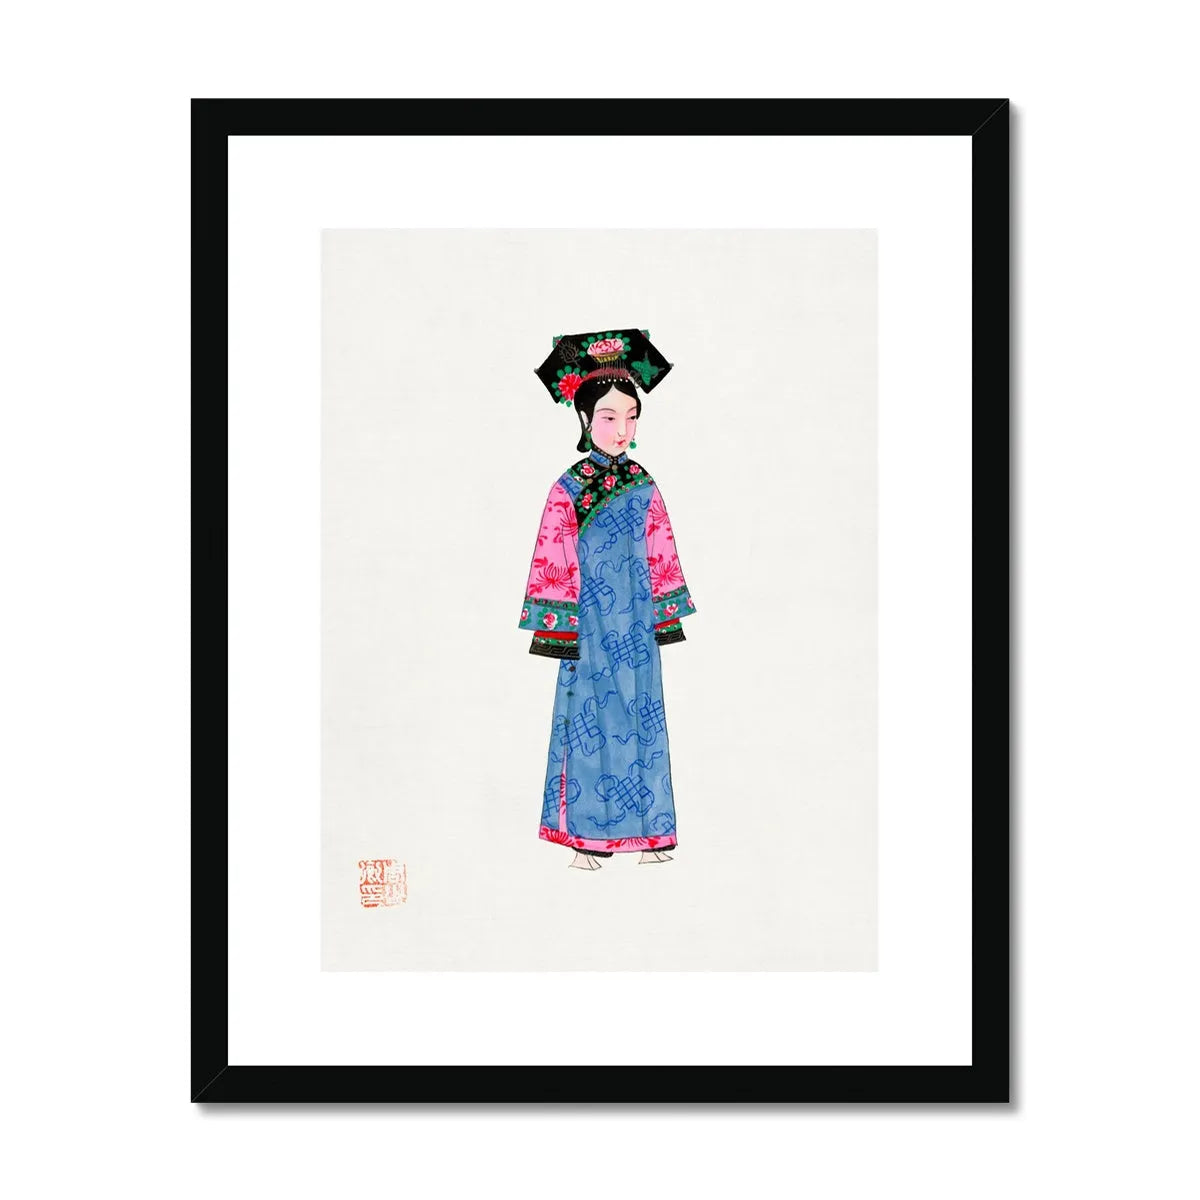 Chinese Noblewoman Too Framed & Mounted Print - 16’x20’ / Black Frame - Posters Prints & Visual Artwork - Aesthetic Art